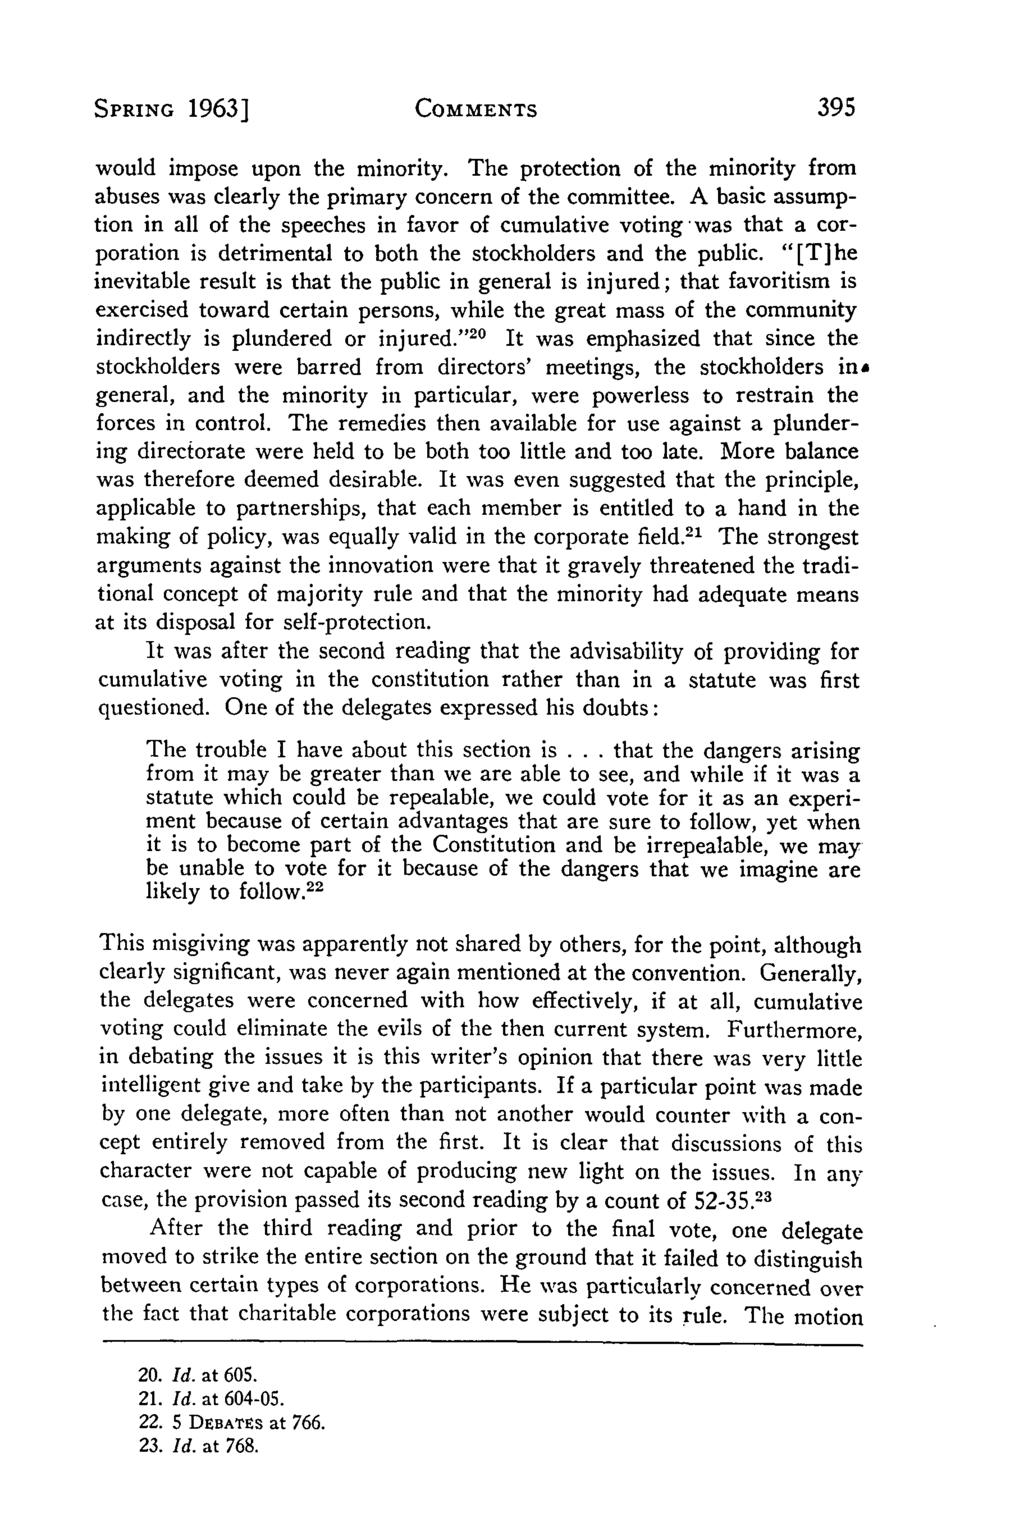 Villanova Law Review, Vol. 8, Iss. 3 [1963], Art. 3 SPRING 1963] COMMENTS would impose upon the minority. The protection of the minority from abuses was clearly the primary concern of the committee.